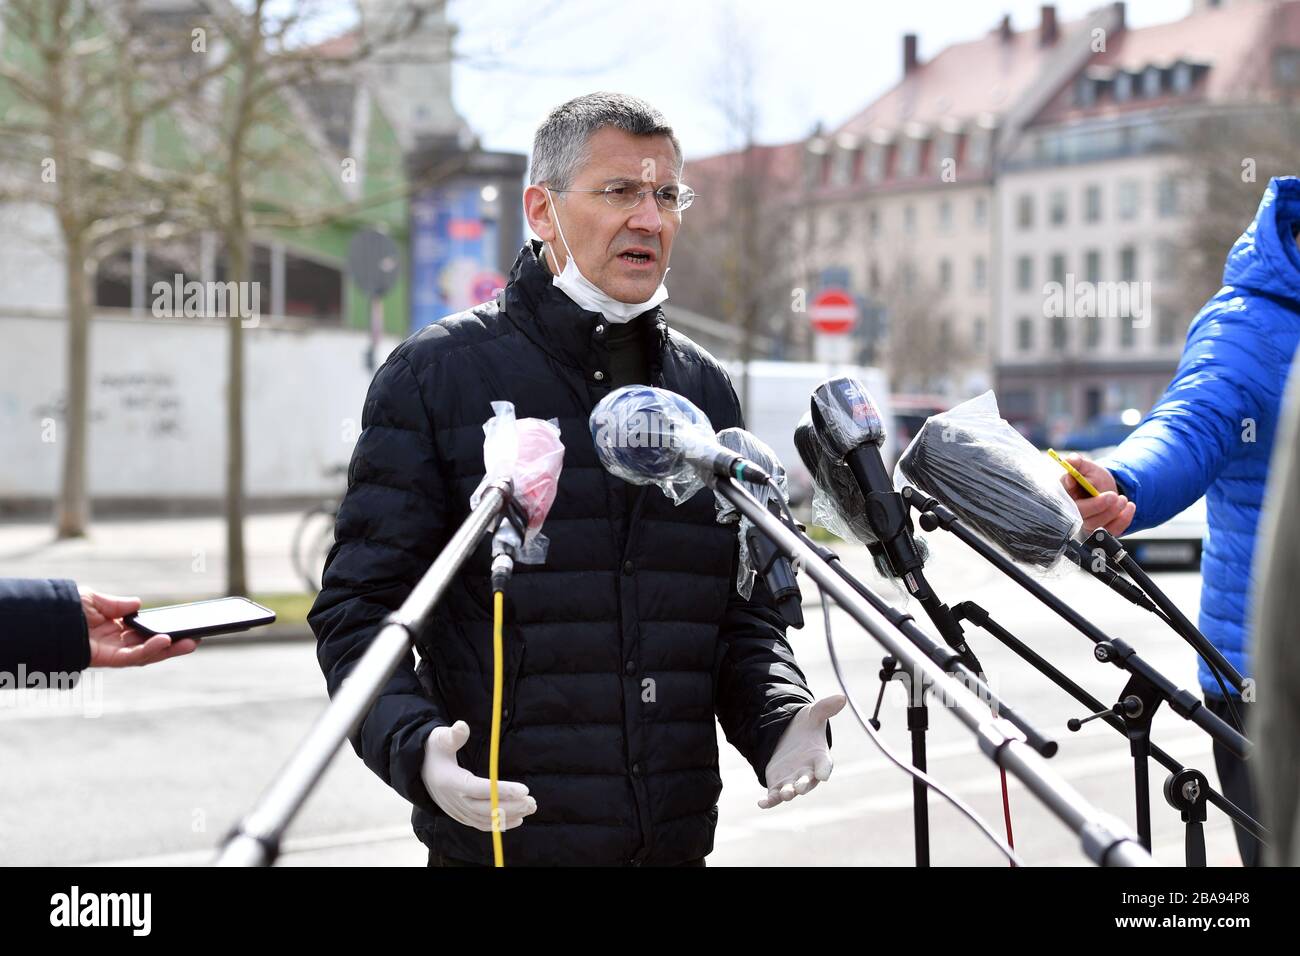 Herbert HAINER (President FC Bayern Munich) wears rubber gloves, protective gloves and, with a face mask, protective mask, stands in front of the media representatives present and speaks in microphones that are protected with plastic films. Single picture, single cut motif, single picture, single cut motif, half figure, half figure. FC Bayern Munich Basketball is helping the Muenchener Tafel on 26.03.2020 in the wholesale market in Muenchen. @Sven Simon Photo Agency. GmbH & Co. Press Photo KG # Prinzess-Luise-Str. 41 # 45479 M uelheim / R uhr # Tel. 0208/9413250 # Fax. 0208/9413260 # GLS Bank Stock Photo